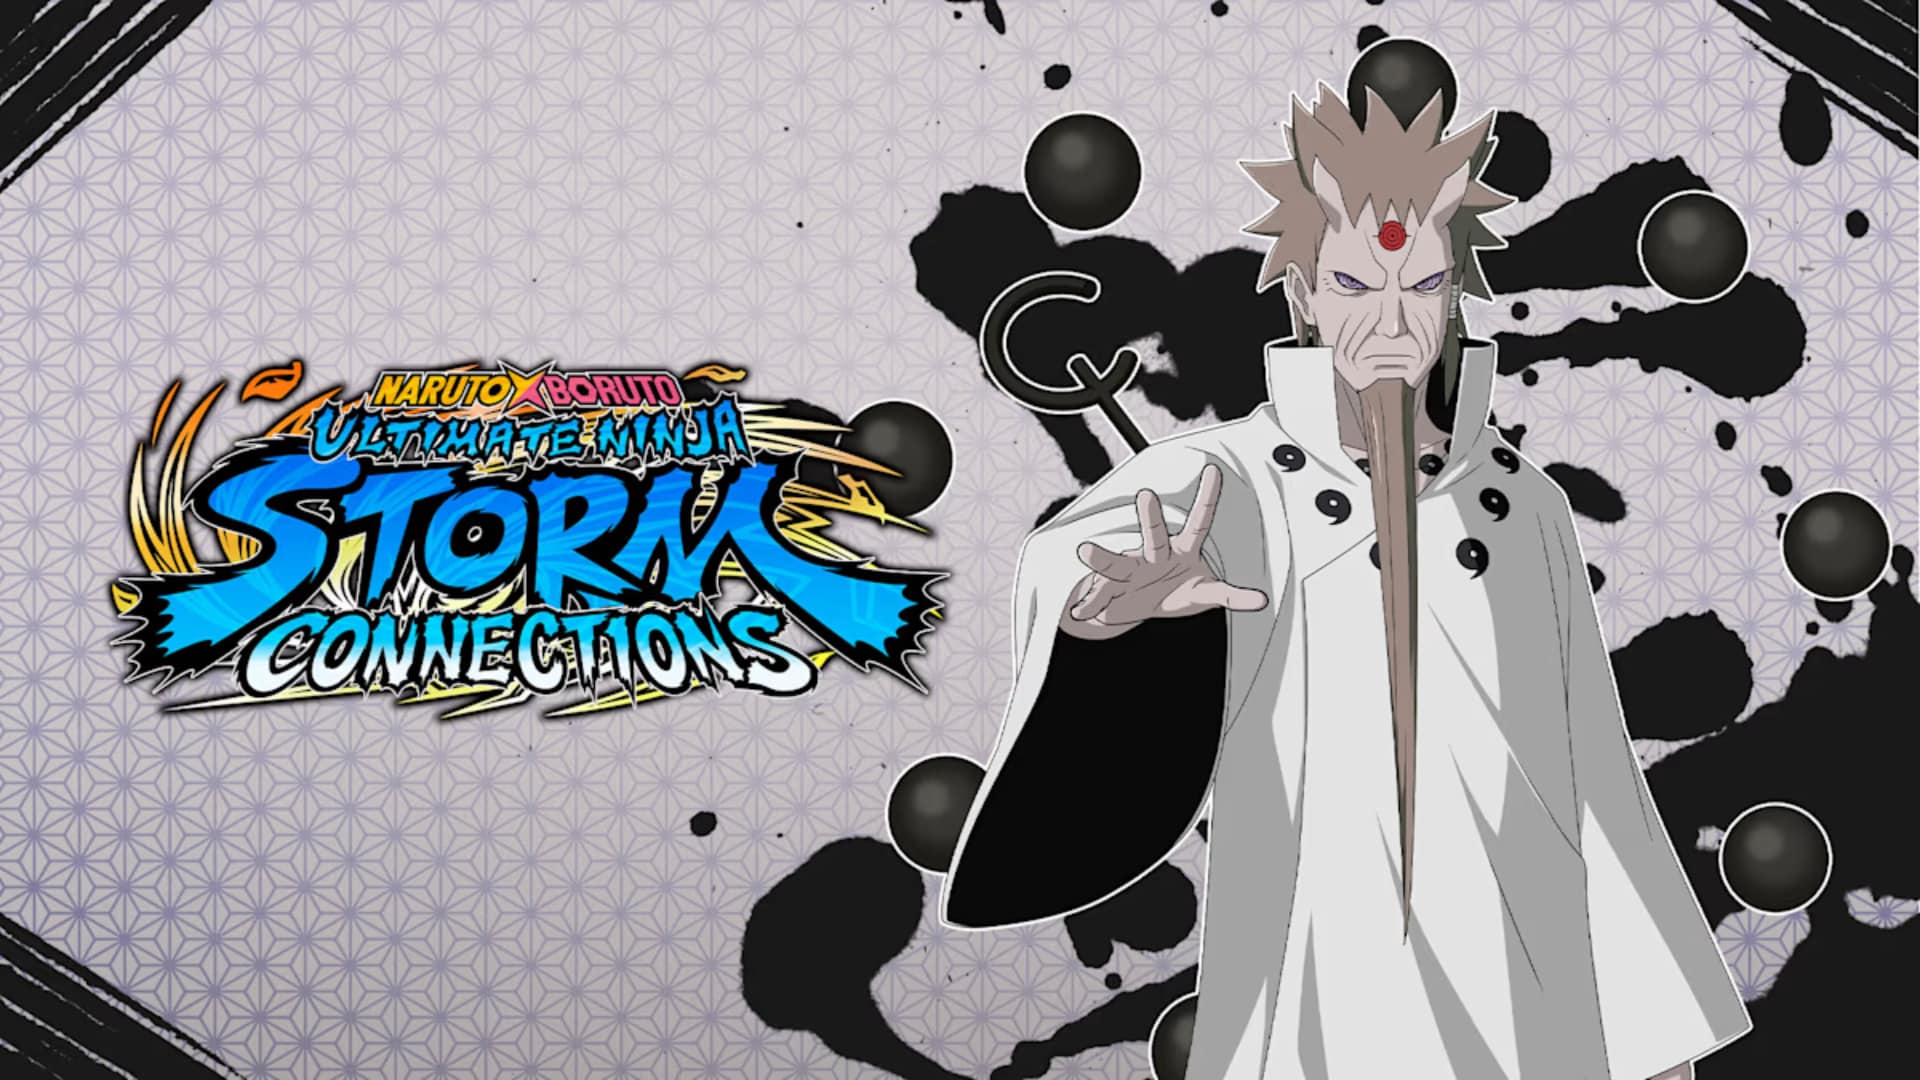 Naruto X Boruto Ultimate Ninja Storm Connections Update 1.11 Out This Jan.  23 - MP1st